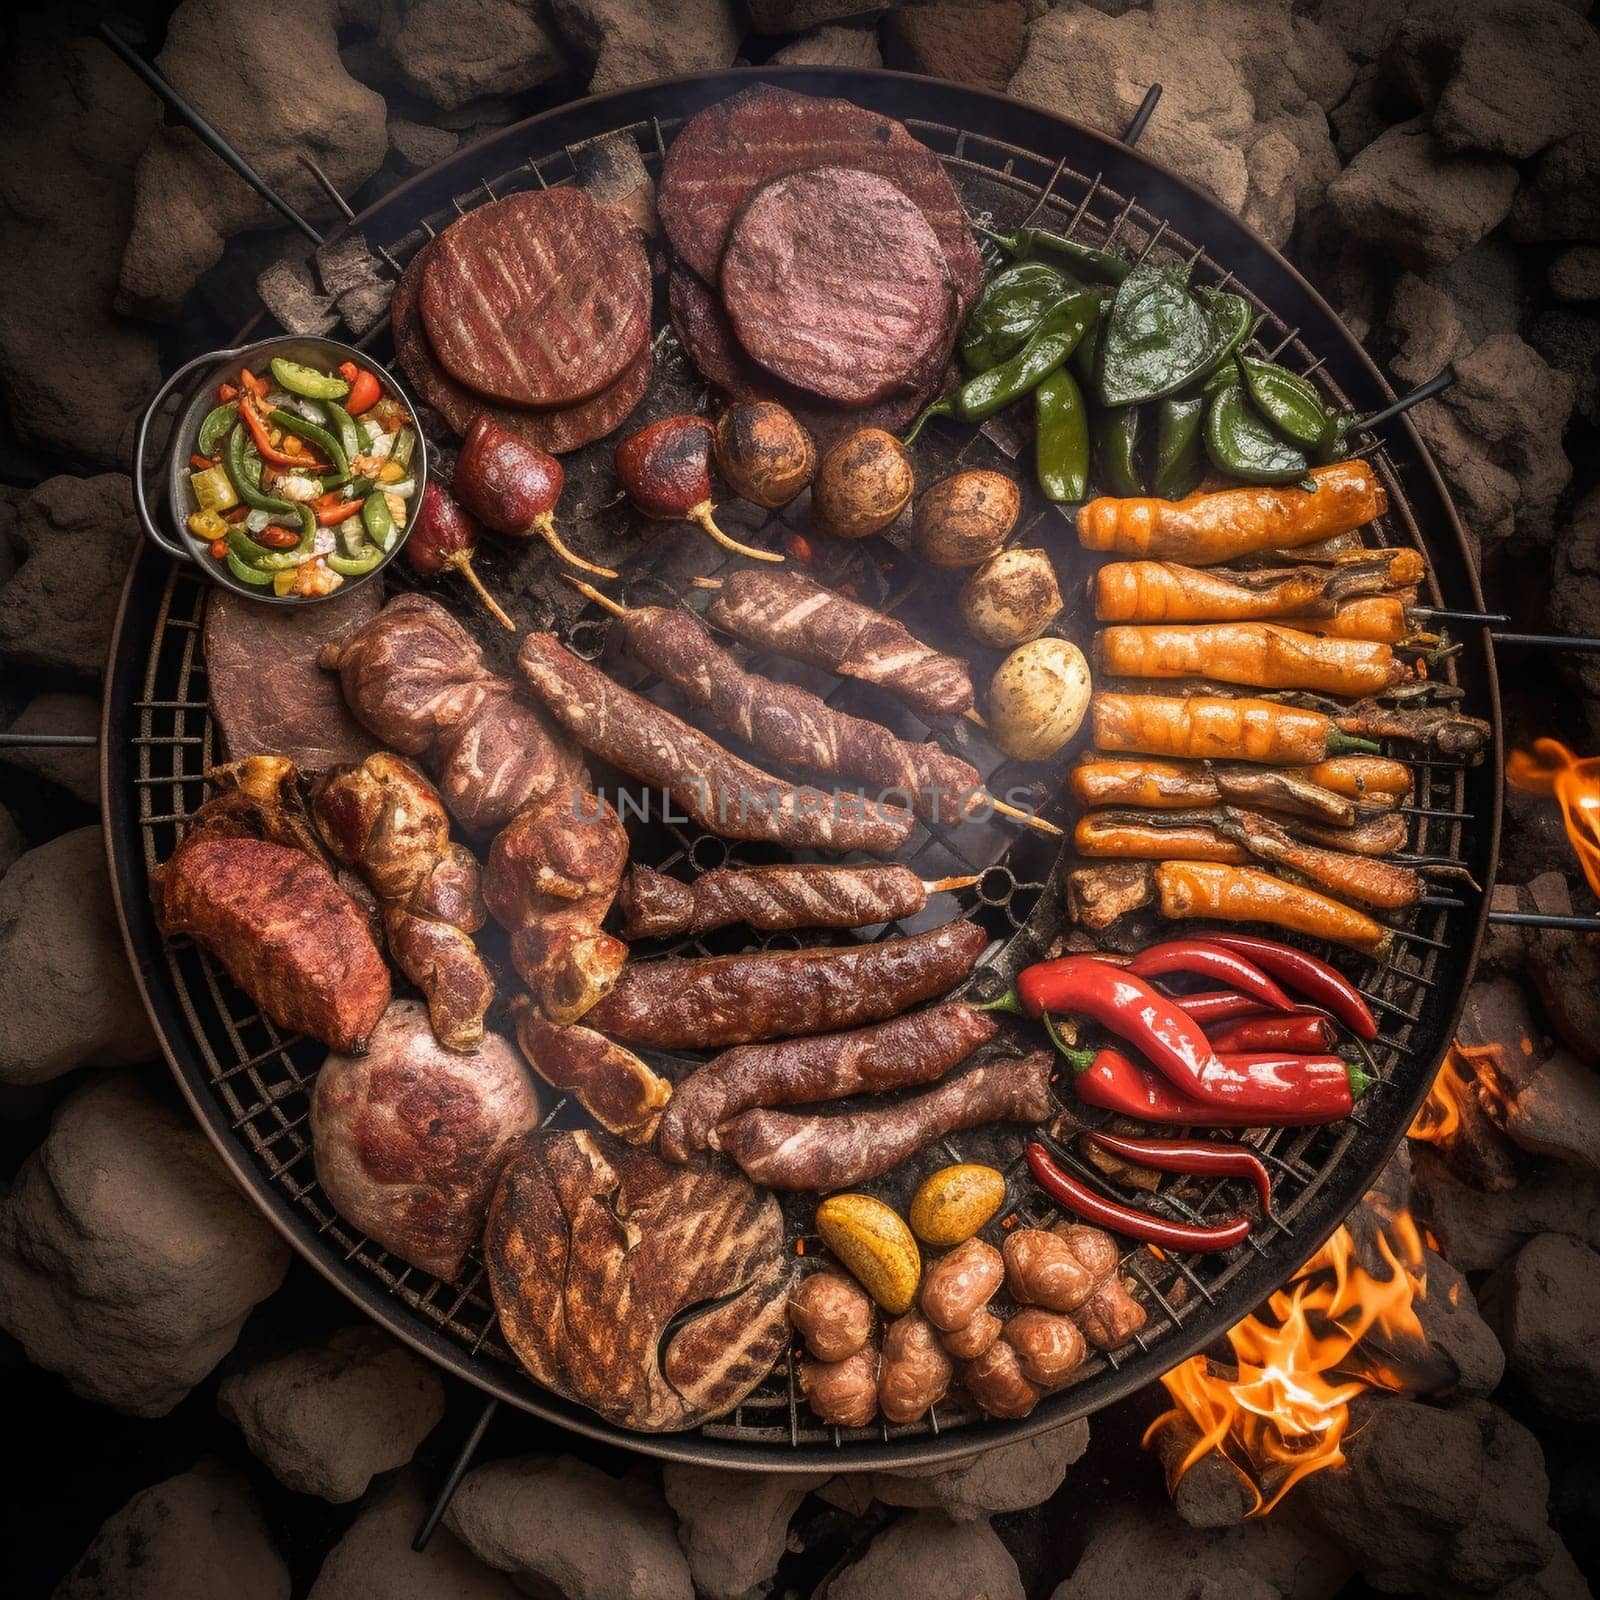 Argentina Asado (Barbecue) with Grilled Meats, Vegetables, and Chimichurri Sauce by Sahin